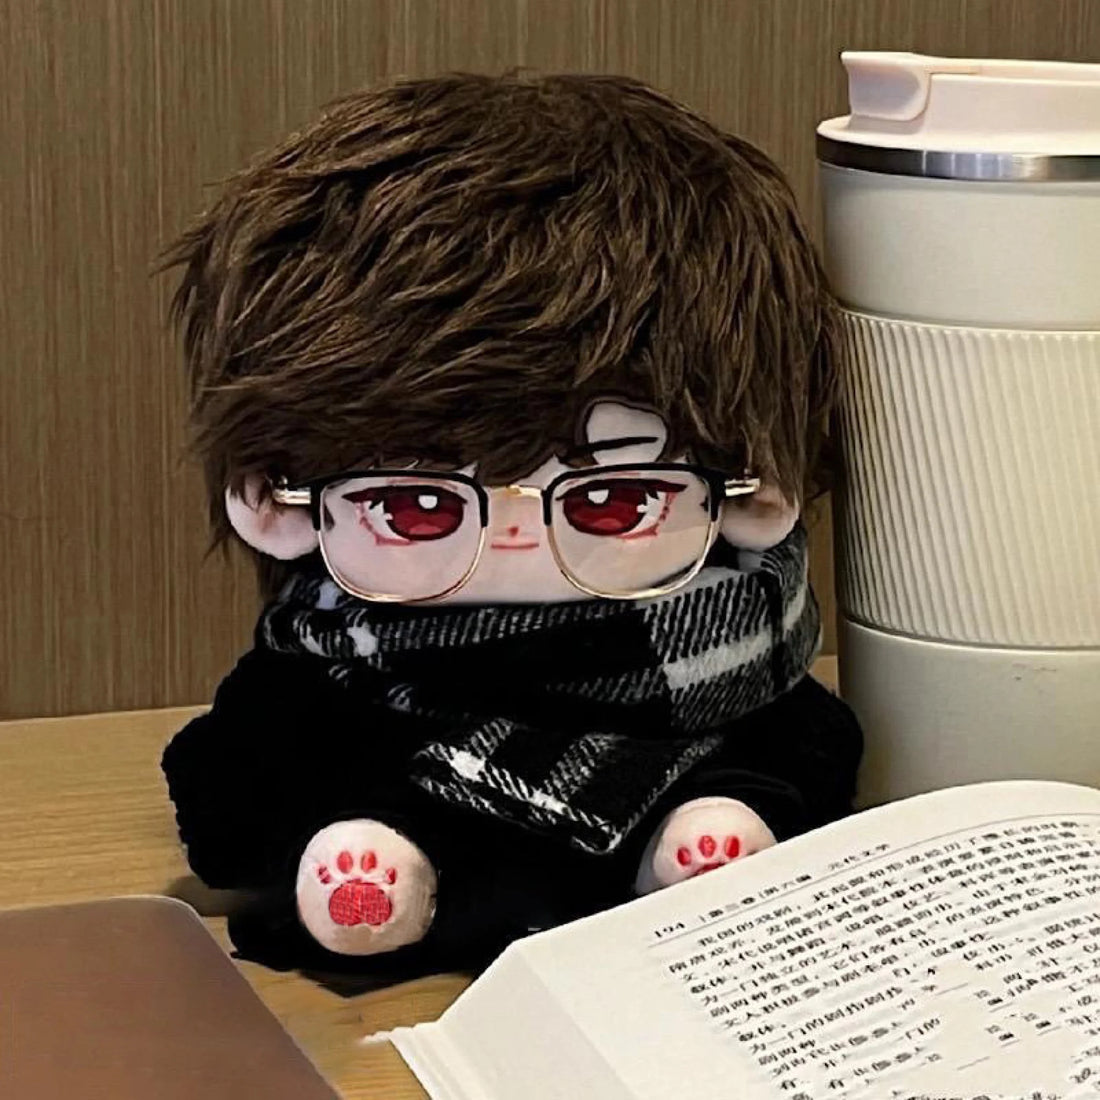 20Cm Cotton Doll Plush Clothes Cute Black Sweater With Plaid Scarf Outfit For Dolls(Outfit Only) 娃衣